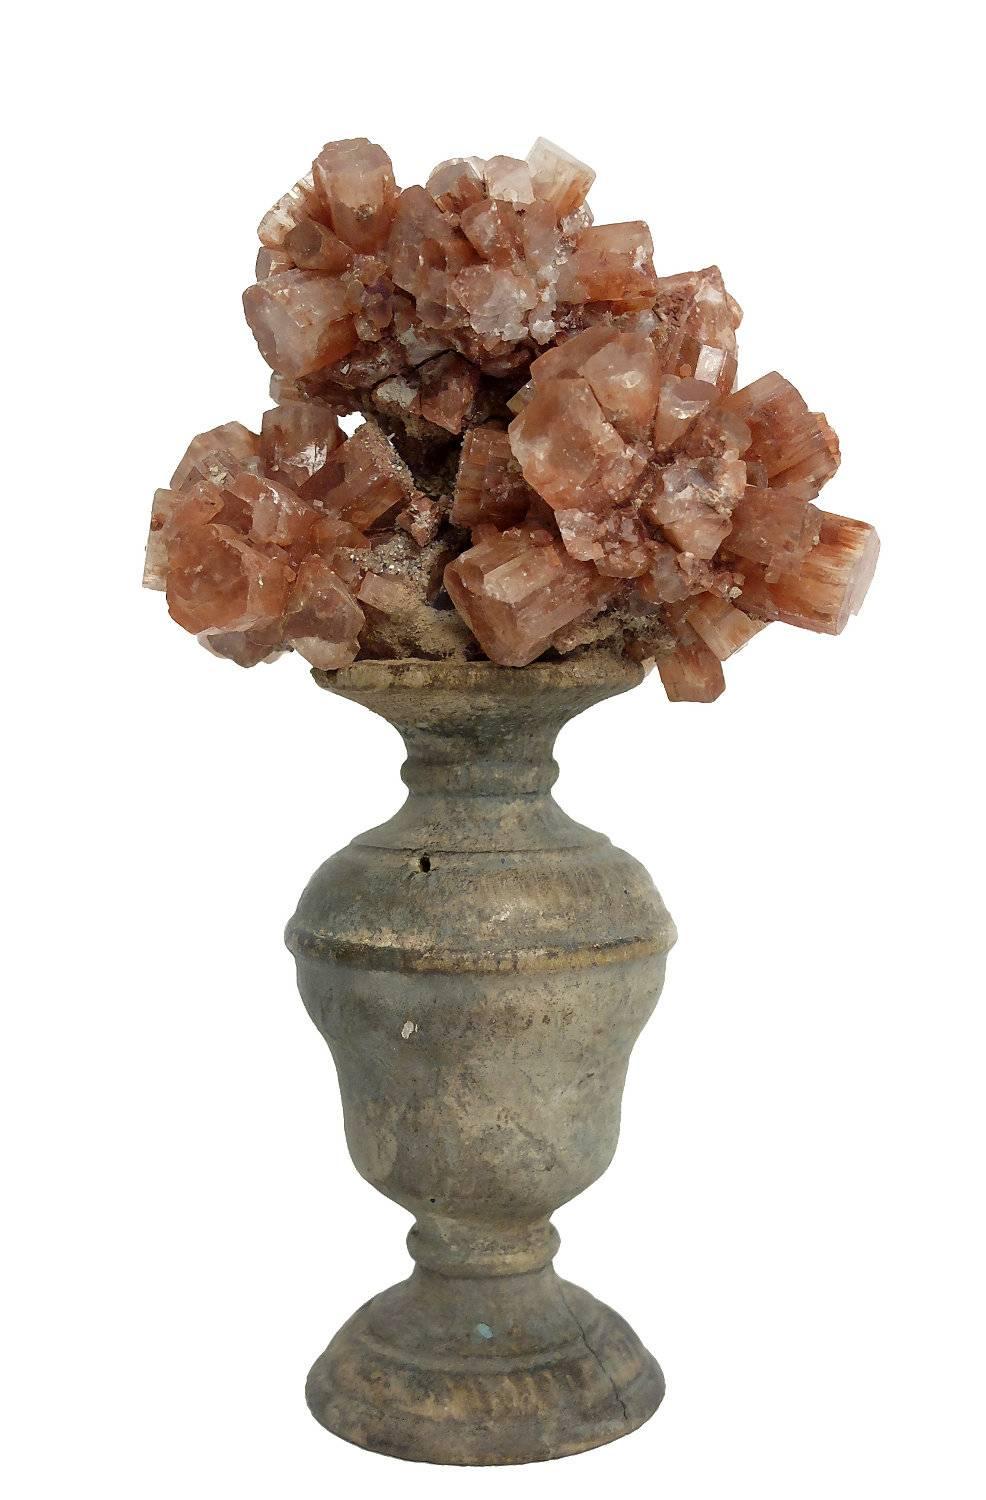 A pair of Naturalia mineral specimens, crystals of Aragonite mounted over a pale wooden bases on a shape of a little vases.